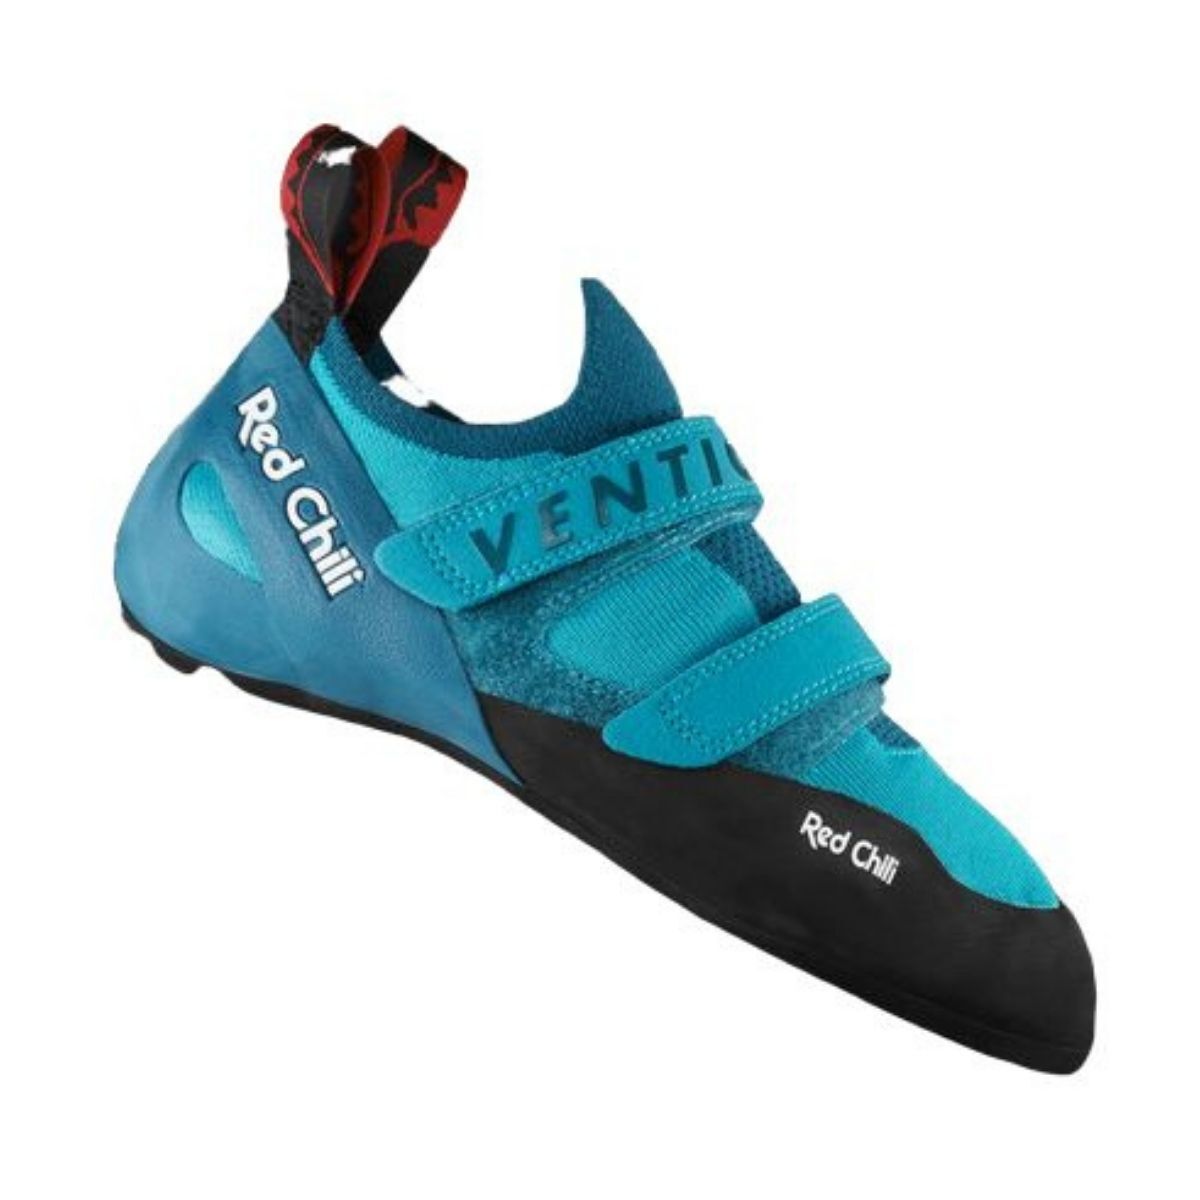 Red Chili Ventic Air  - Kletterschuhe